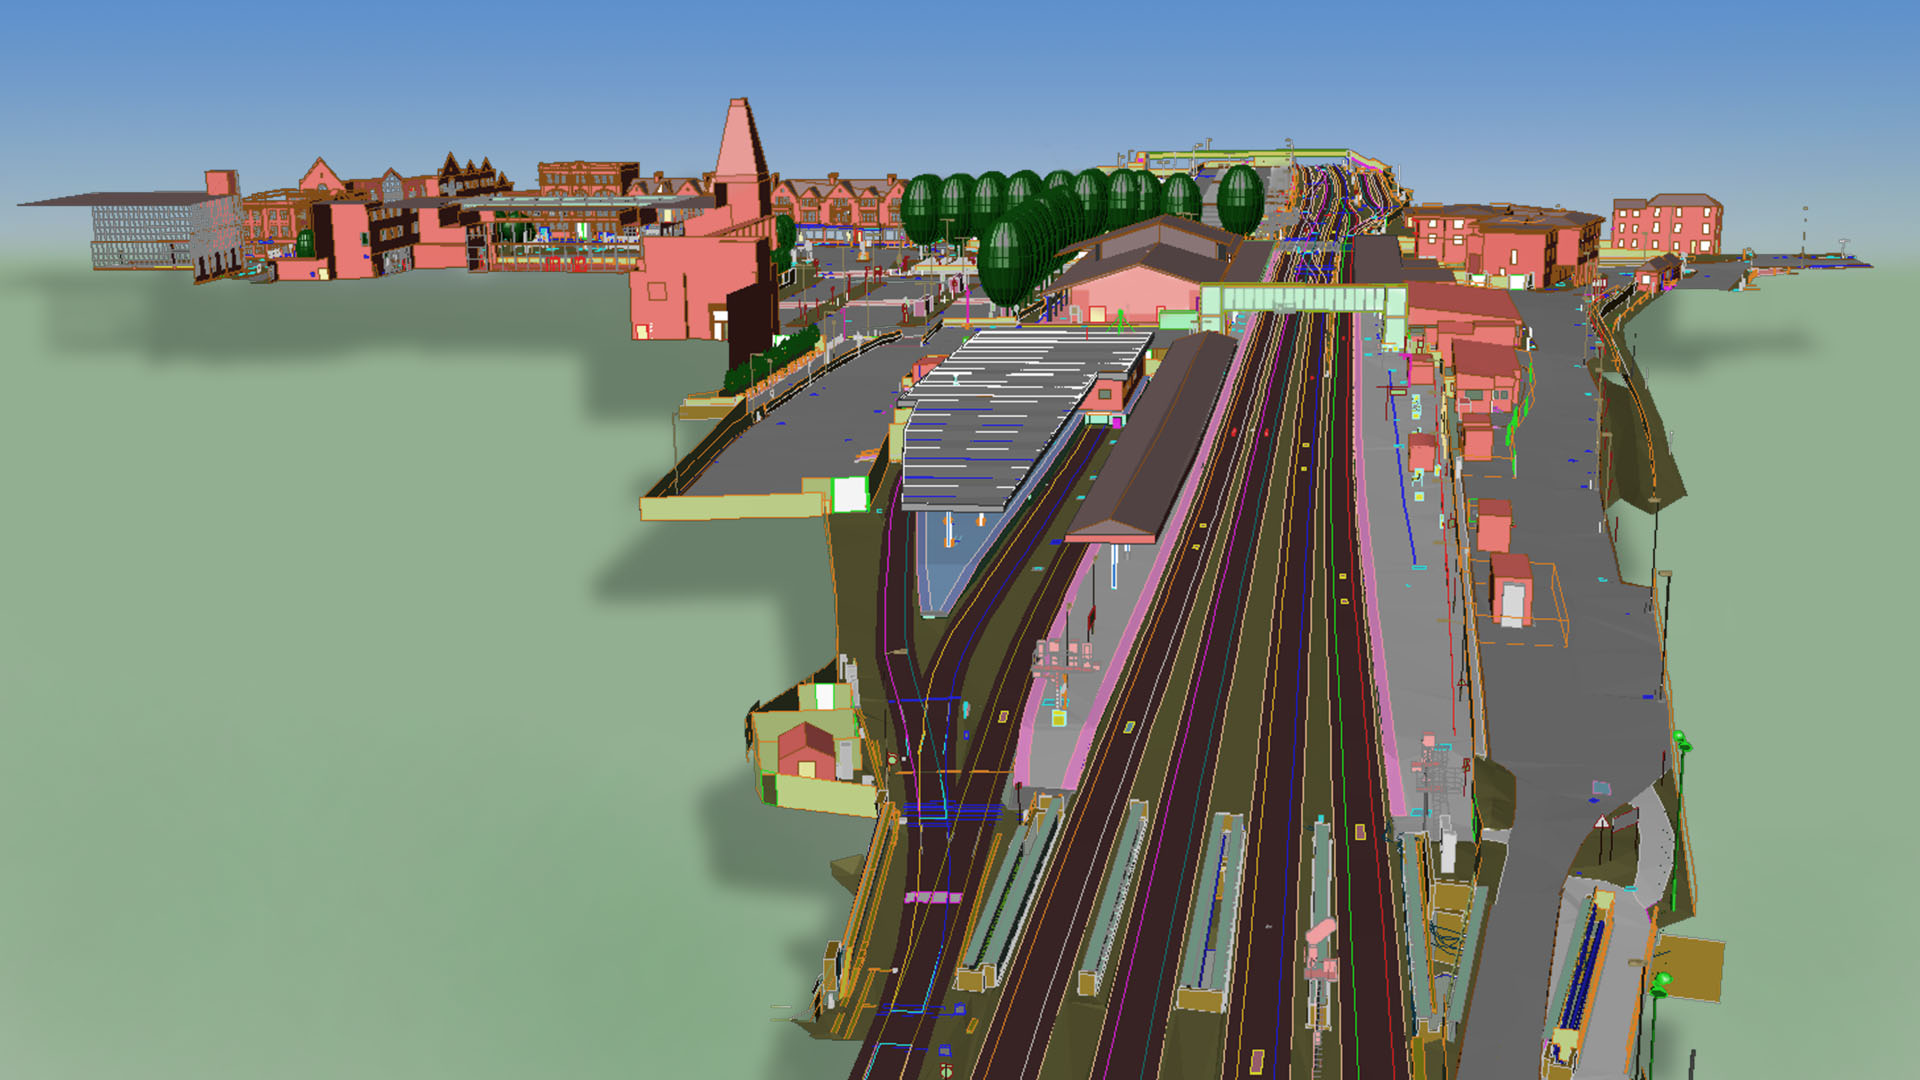 3D CAD model of Oxford Station before construction work